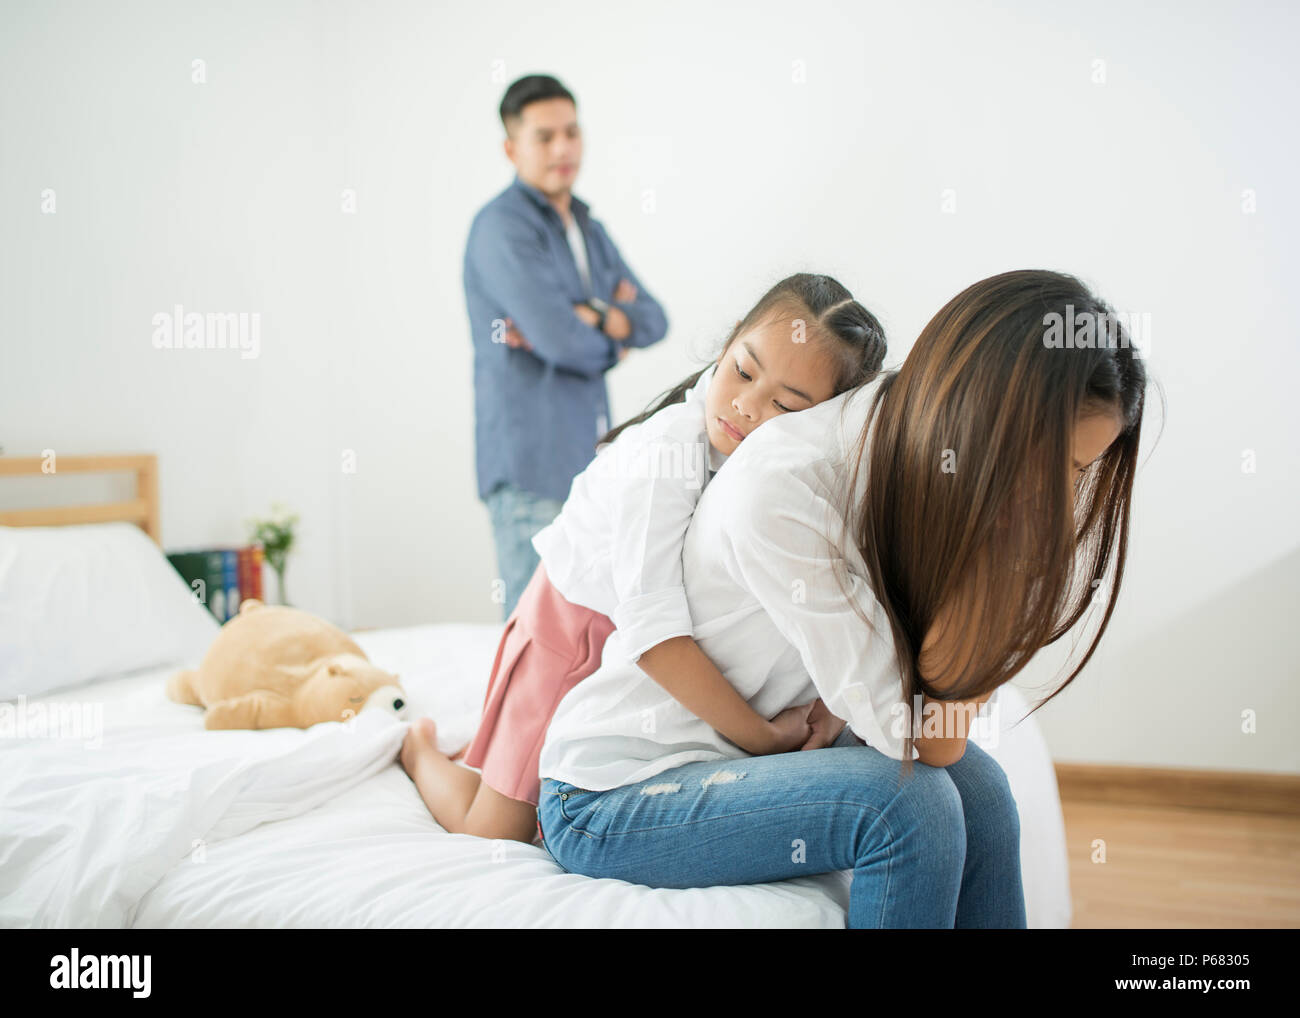 A little girl sad with her parents are arguing in the background bed room, Asian happy loving family.Soft and select focus. Stock Photo